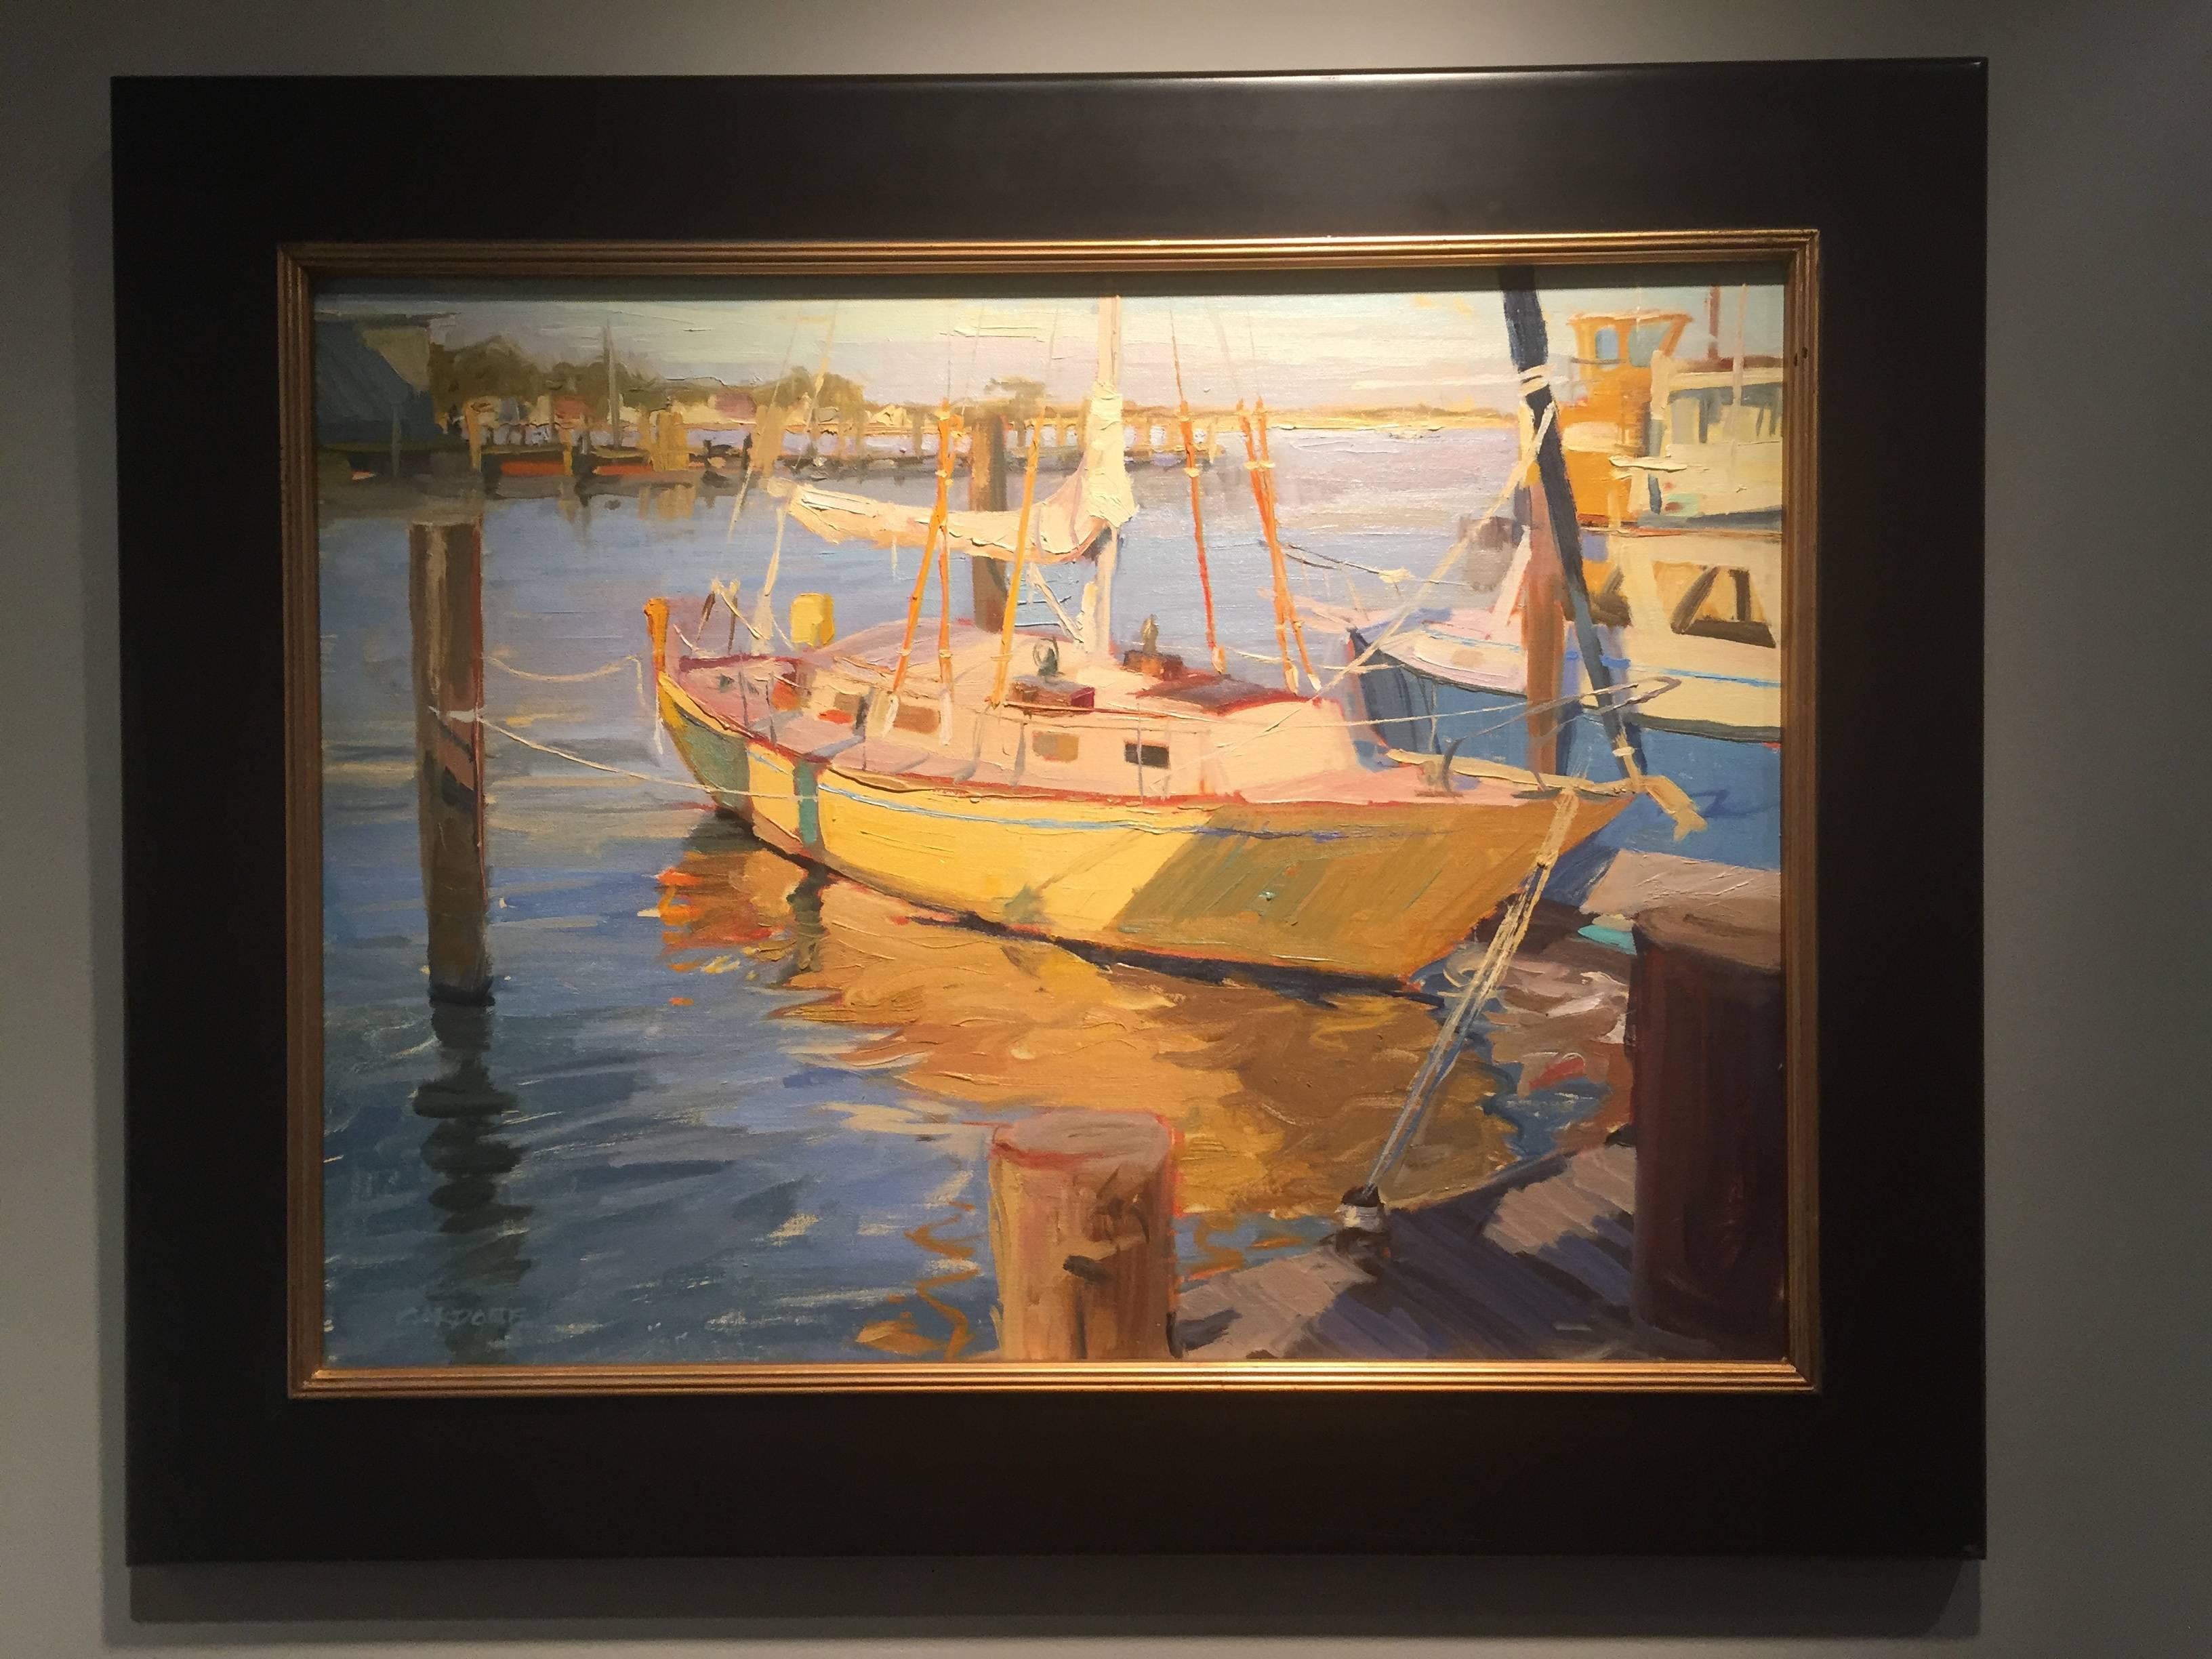 Greenport Shipyard, Afternoon - Painting by Thomas Cardone